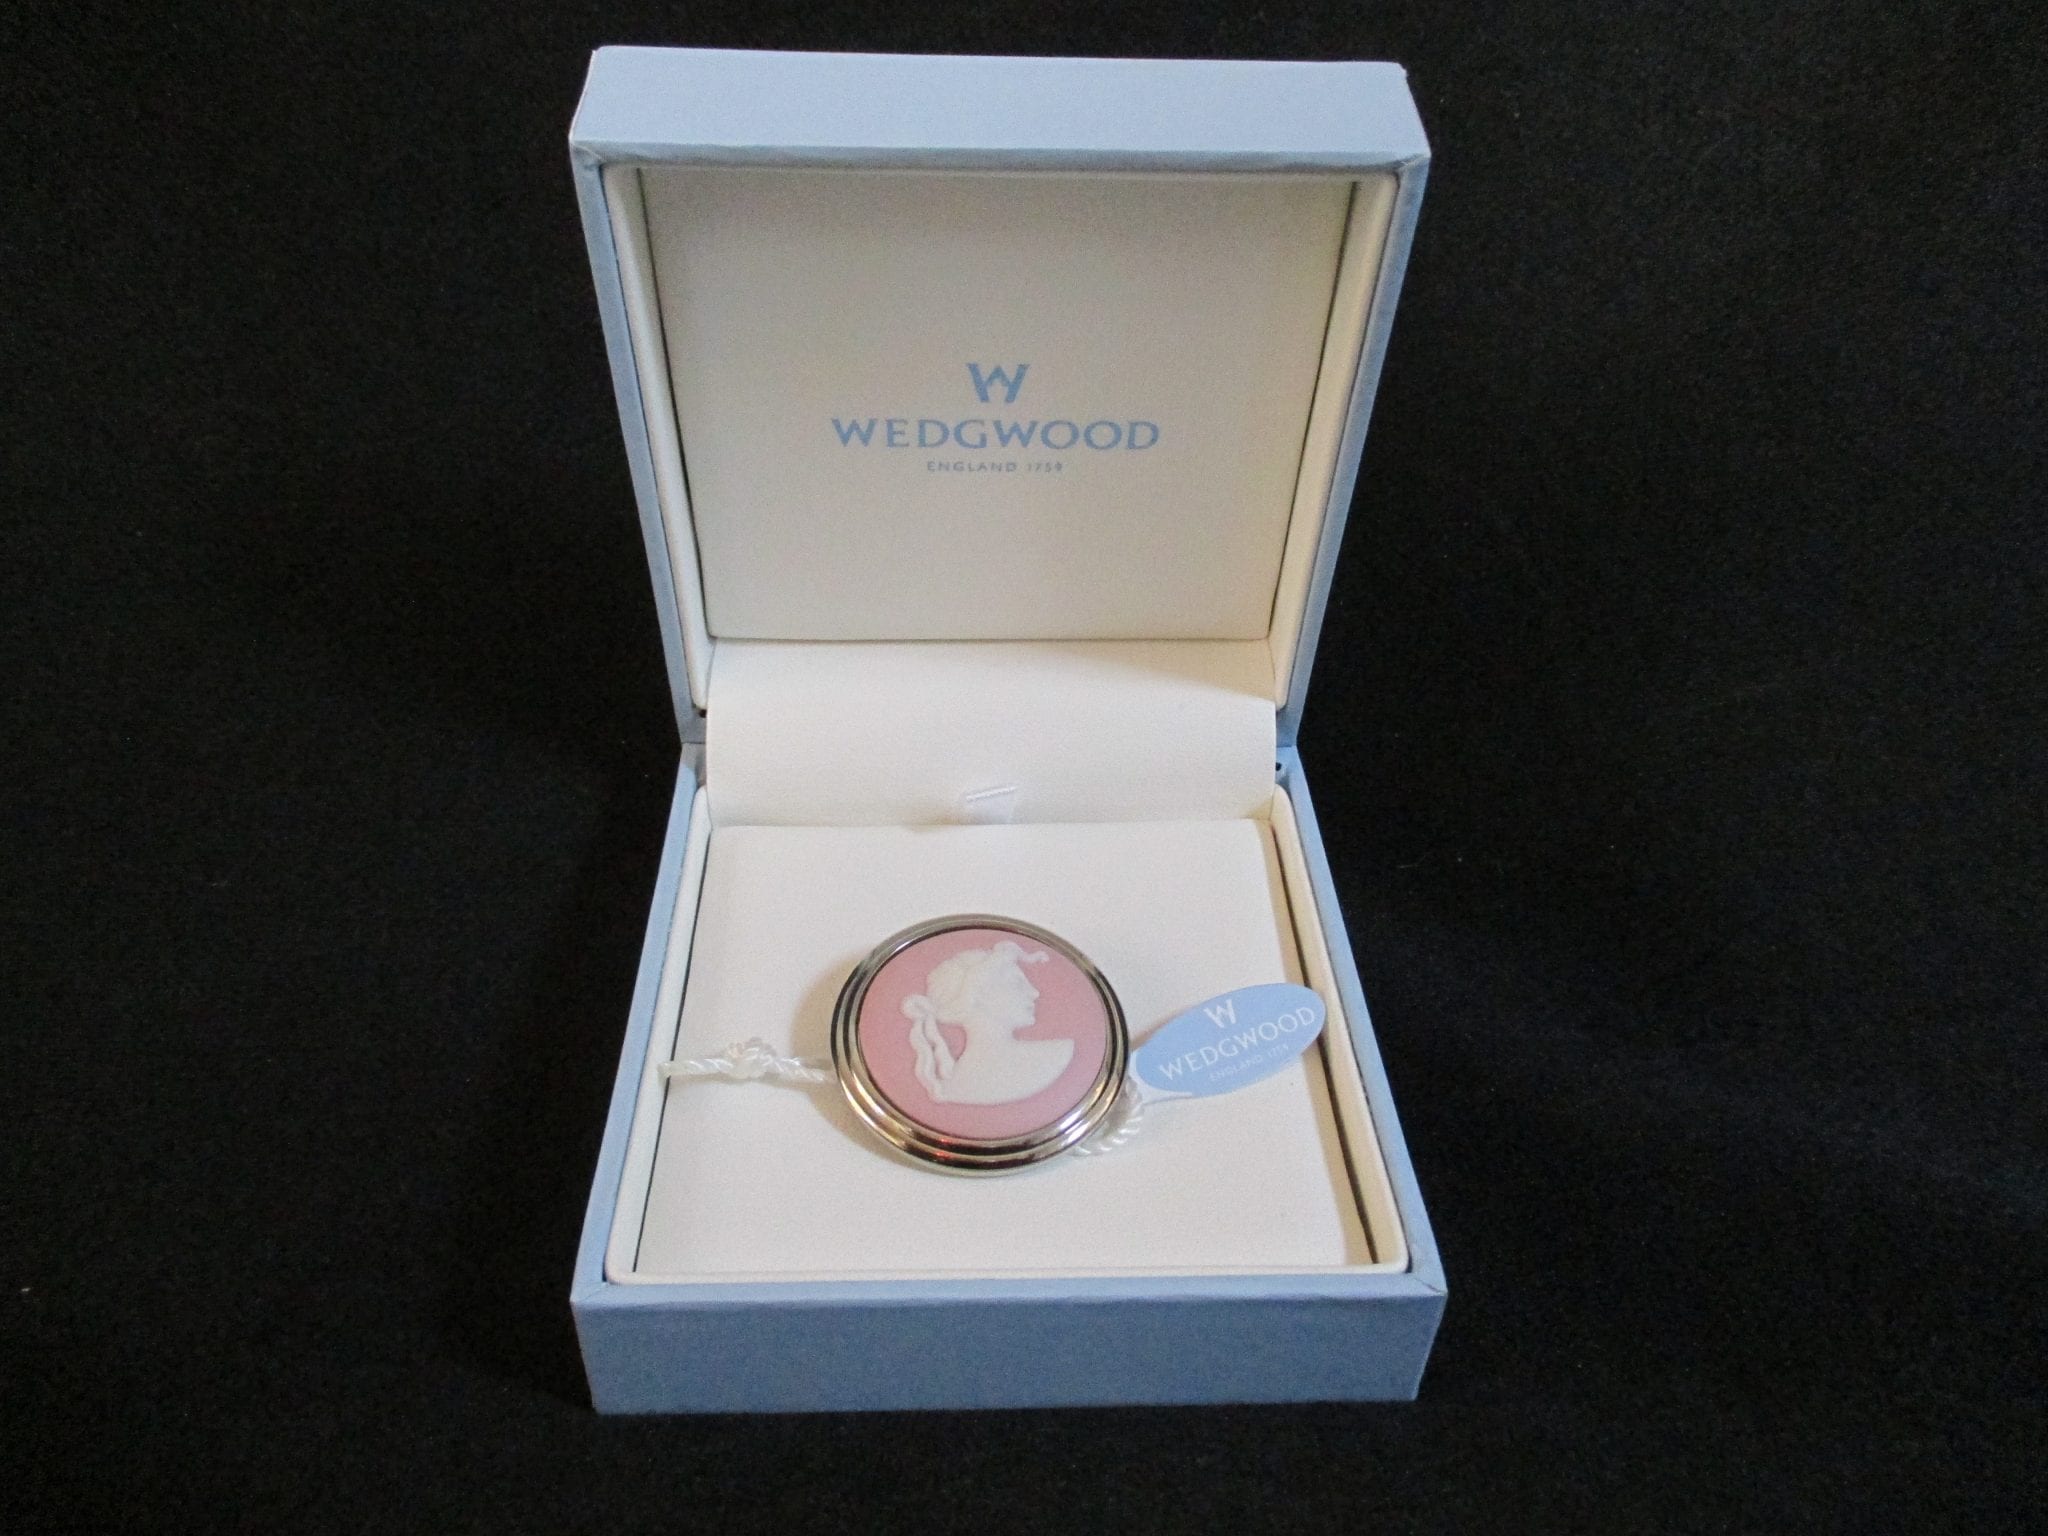 Wedgwood Jewelery - Brooch Pink Classic - Palladium Plated | Missing Pieces  Discontinued Tableware - China Replacements - Dinnerware - Crystal -  Stemware - Flatware - Winnipeg, MB